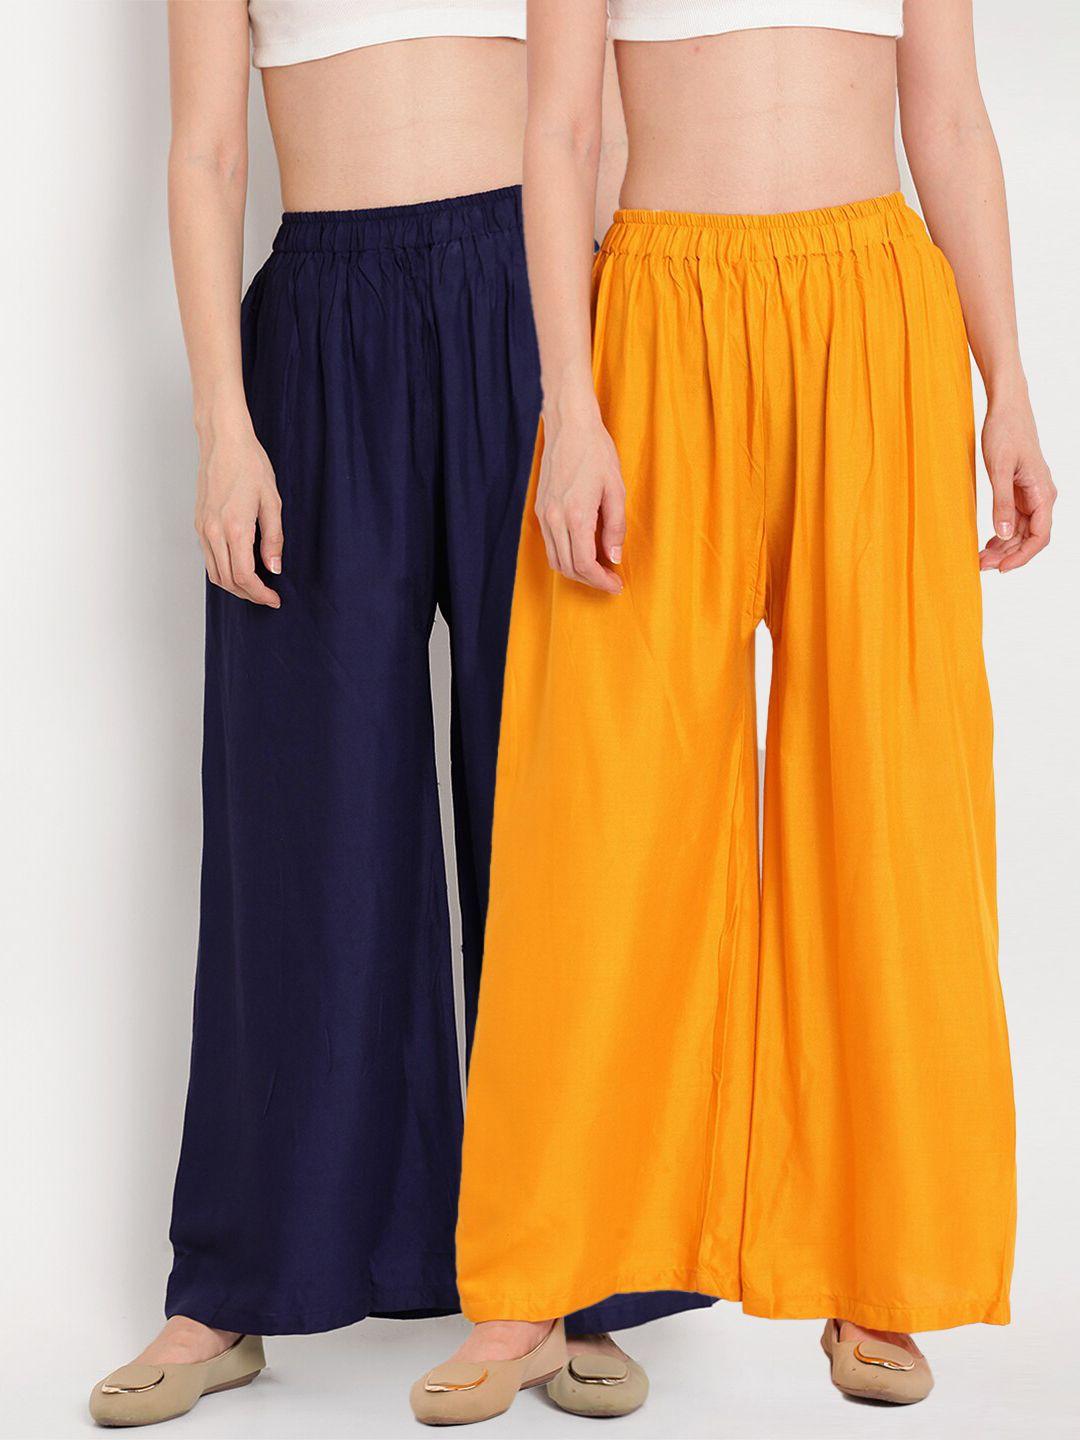 tag 7 women yellow & navy blue set of 2 flared ethnic palazzos